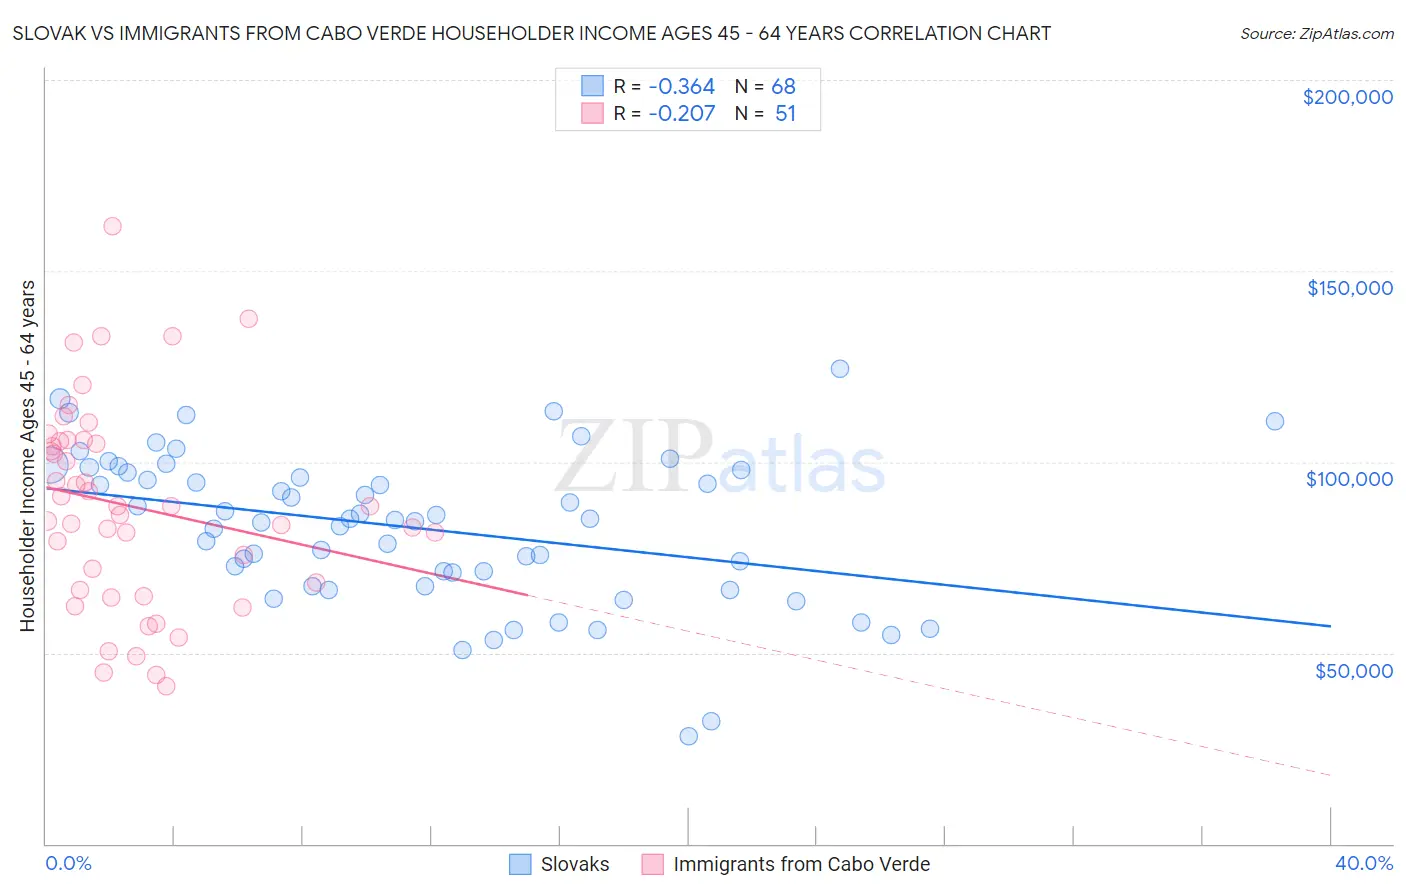 Slovak vs Immigrants from Cabo Verde Householder Income Ages 45 - 64 years